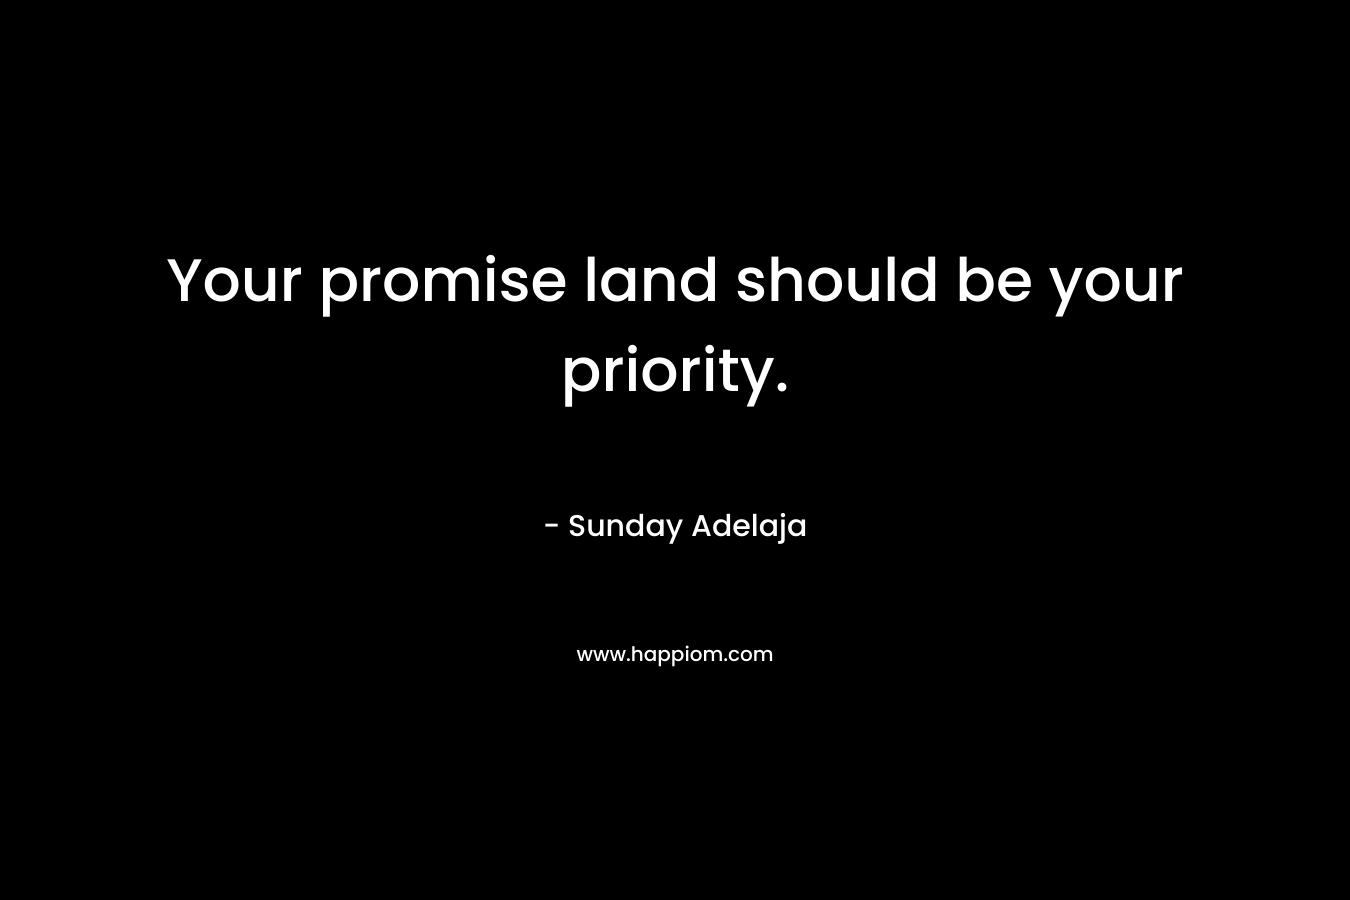 Your promise land should be your priority.